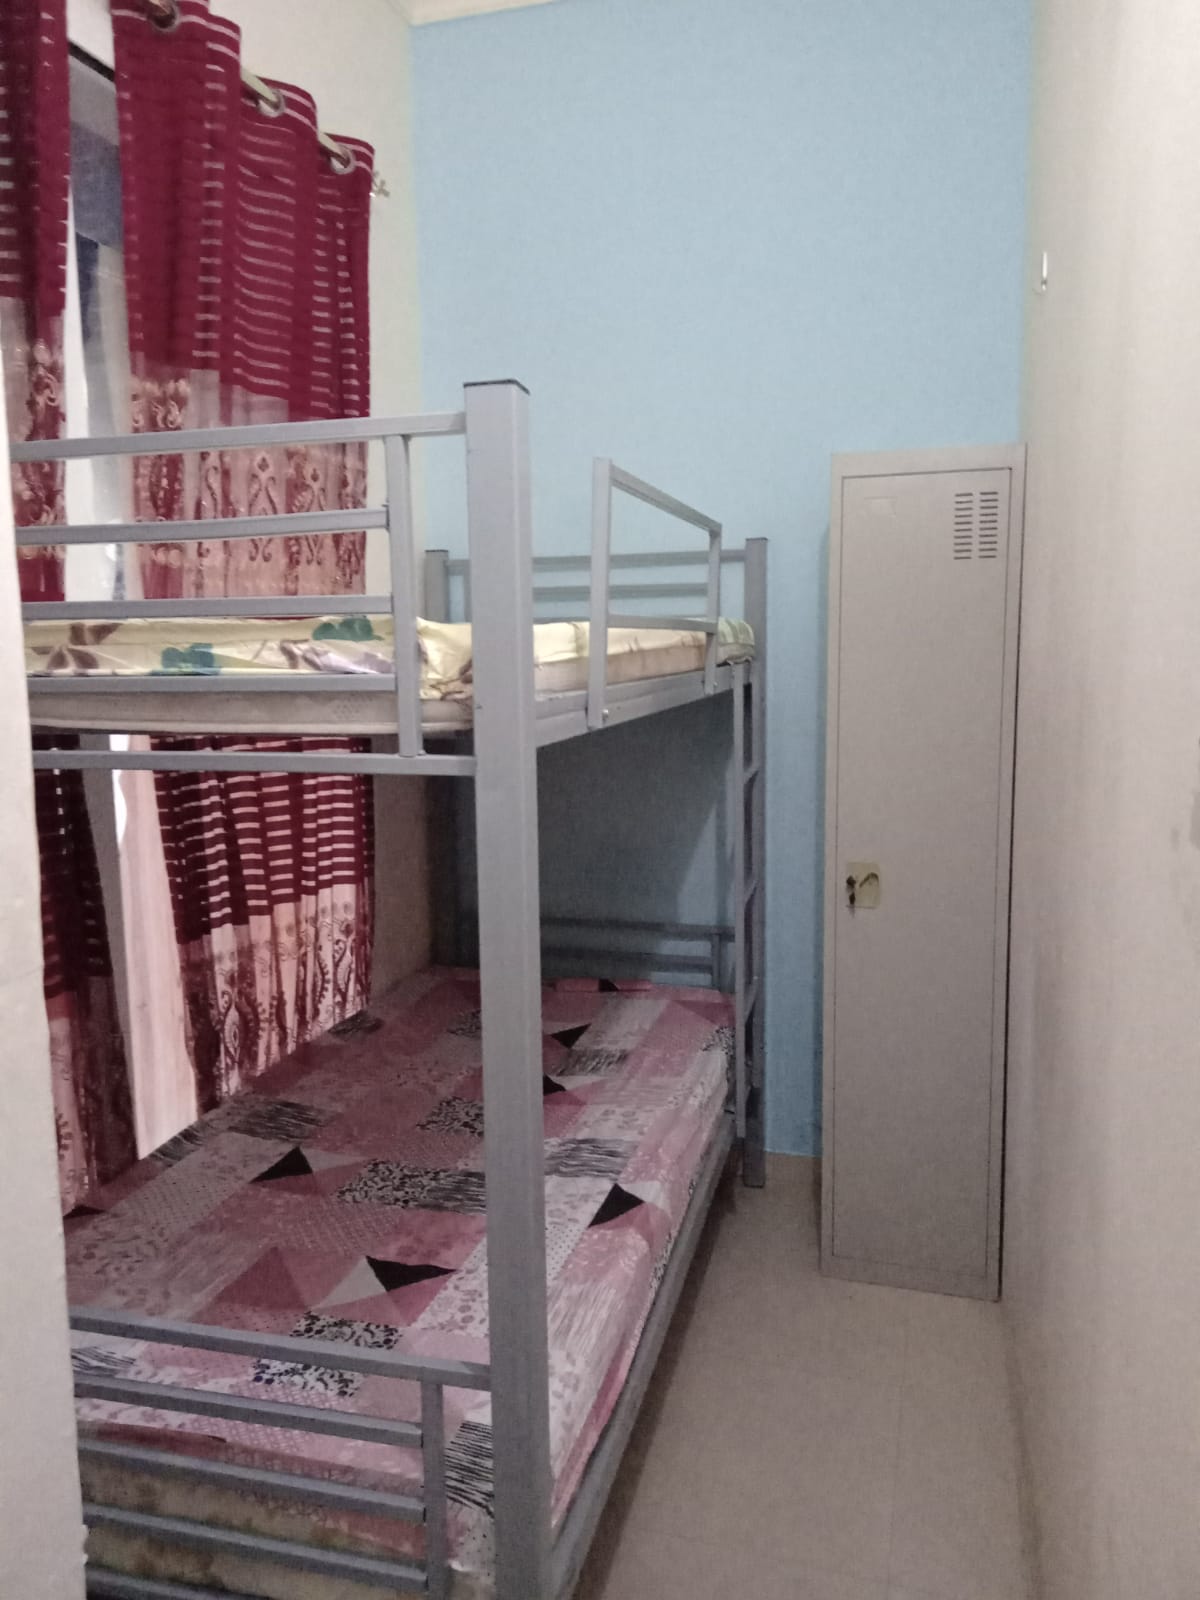 Closed Partitions for Males & Females 2 Persons Only in Bur Dubai @1200 Inclusive All, C/Ac, Gas, Dewa, Wifi